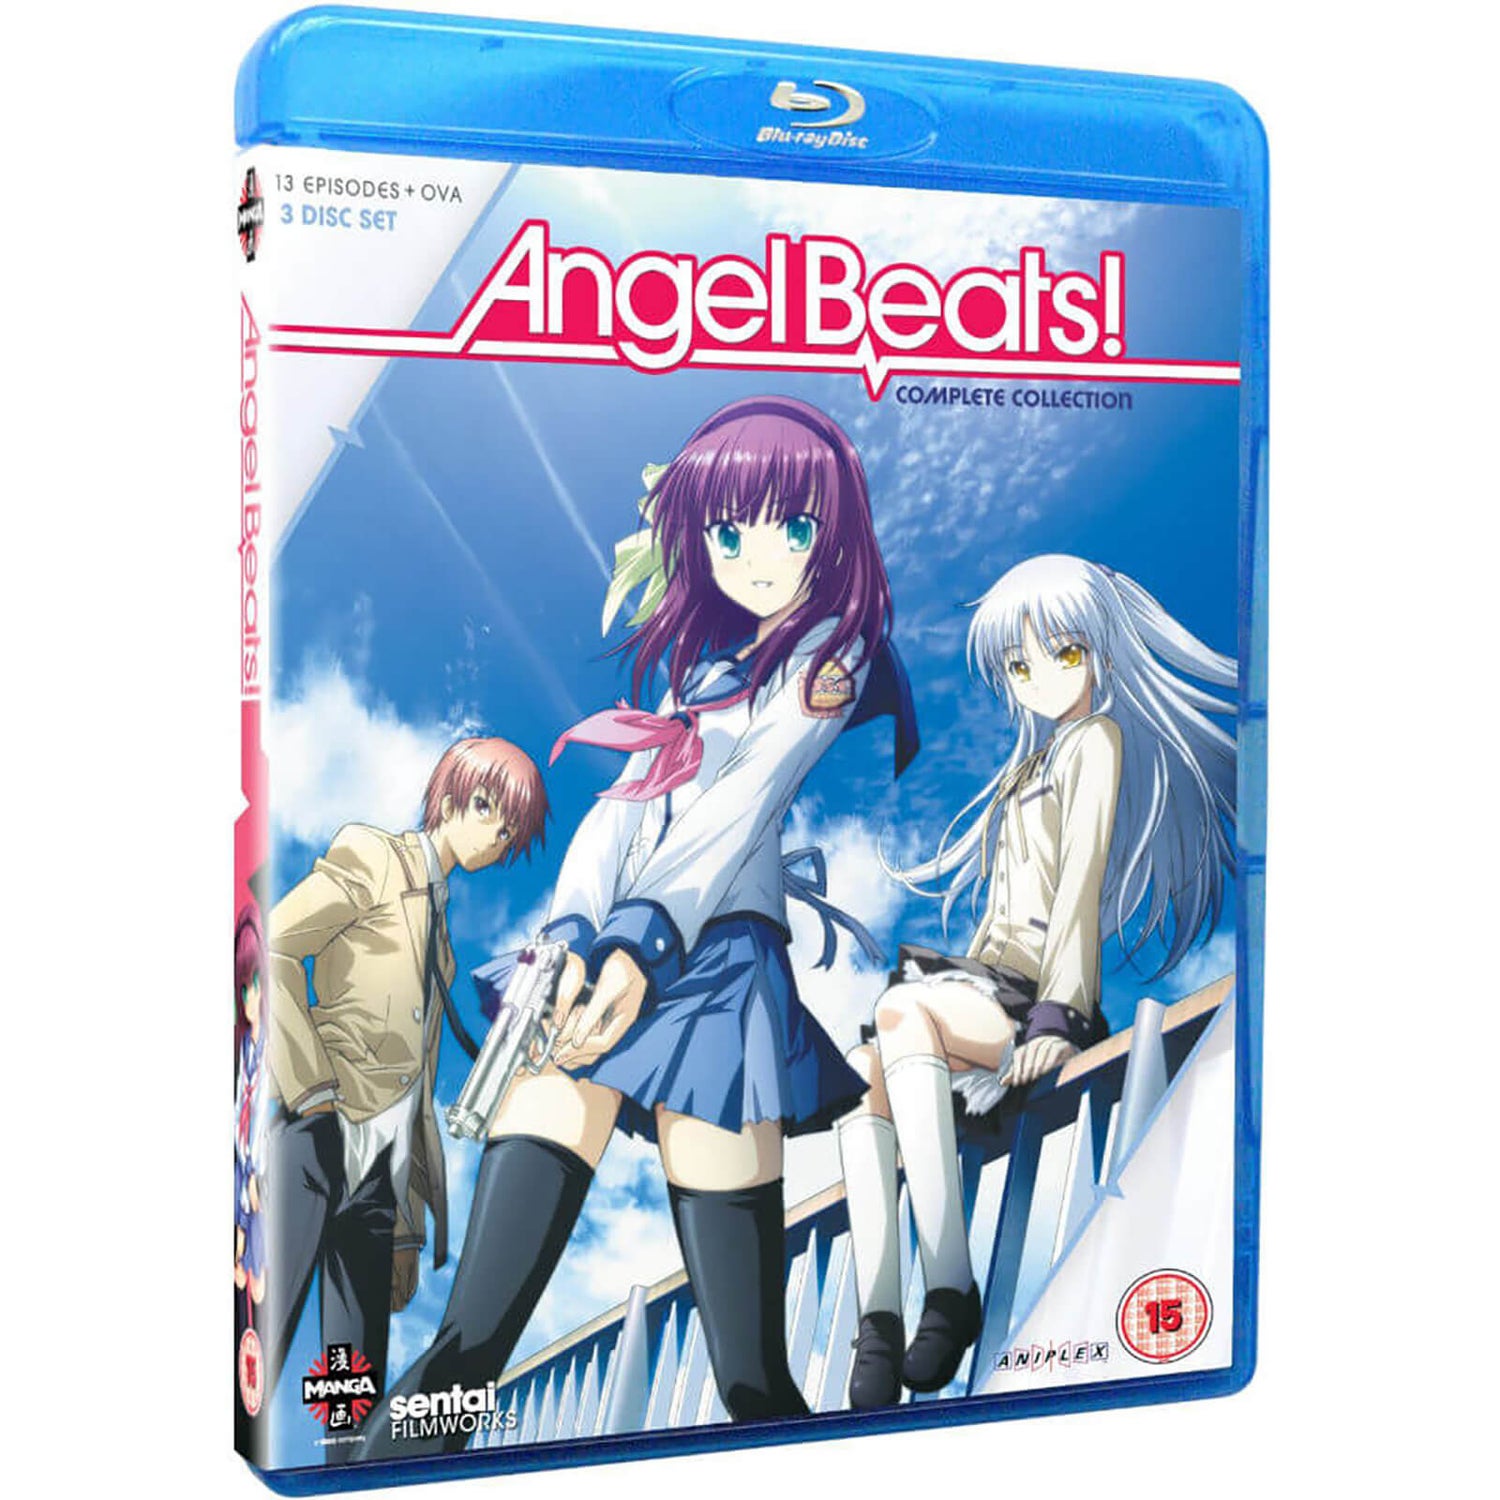 Angels of Death: The Complete Series [Blu-ray]